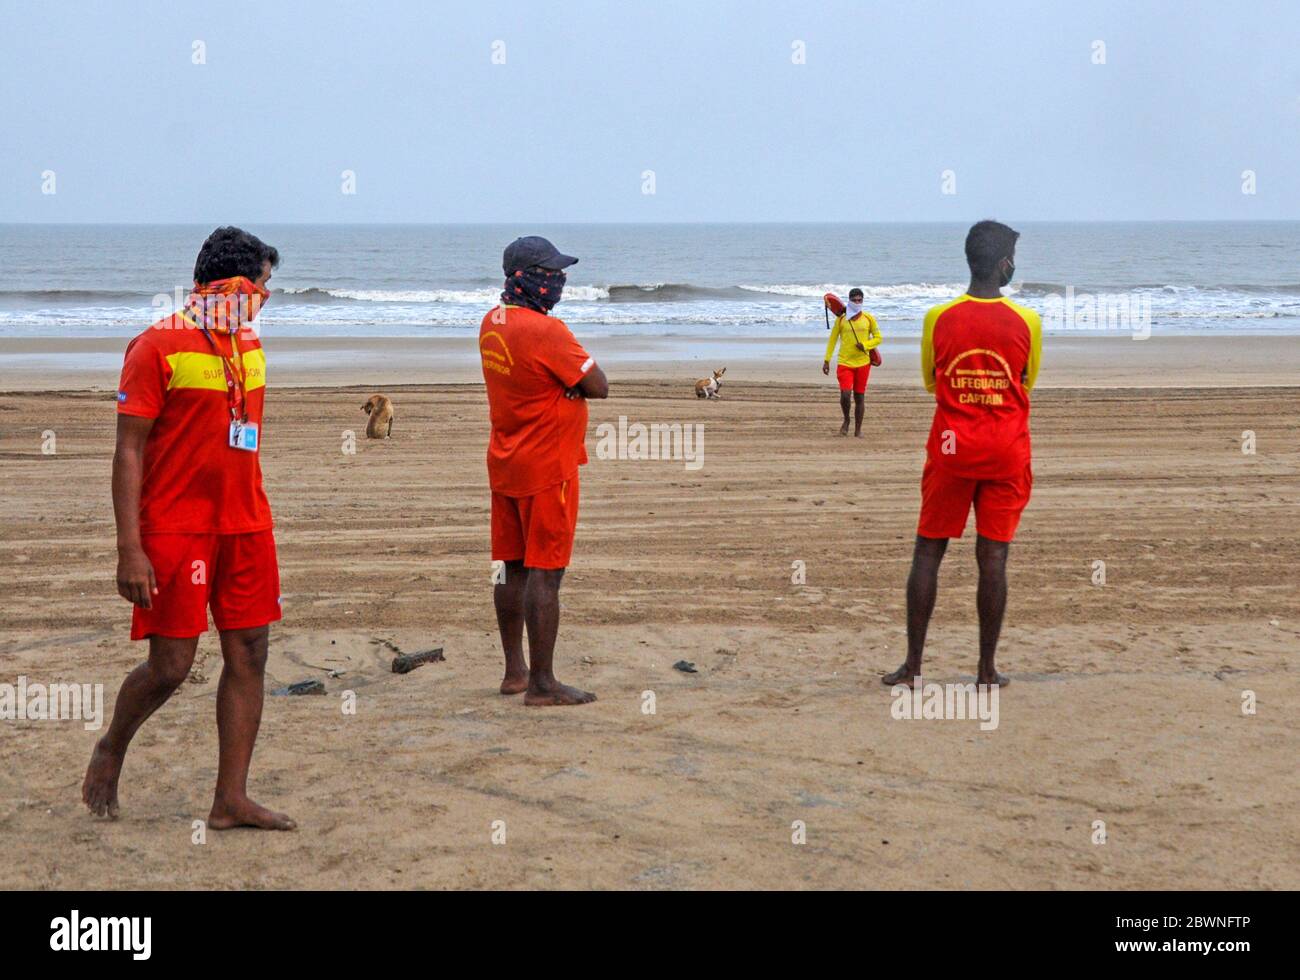 Lifeguards patrol the beach in preparation for the cyclone. India Meteorological Department (IMD) says that tropical cyclone ?isarga?has headed for the Maharashtra coast. People have been advised to stay indoors, be prepared to face possible power cuts as strong winds hit the city. National Disaster Response Force (NDRF) has positioned nine teams in vulnerable districts. Stock Photo